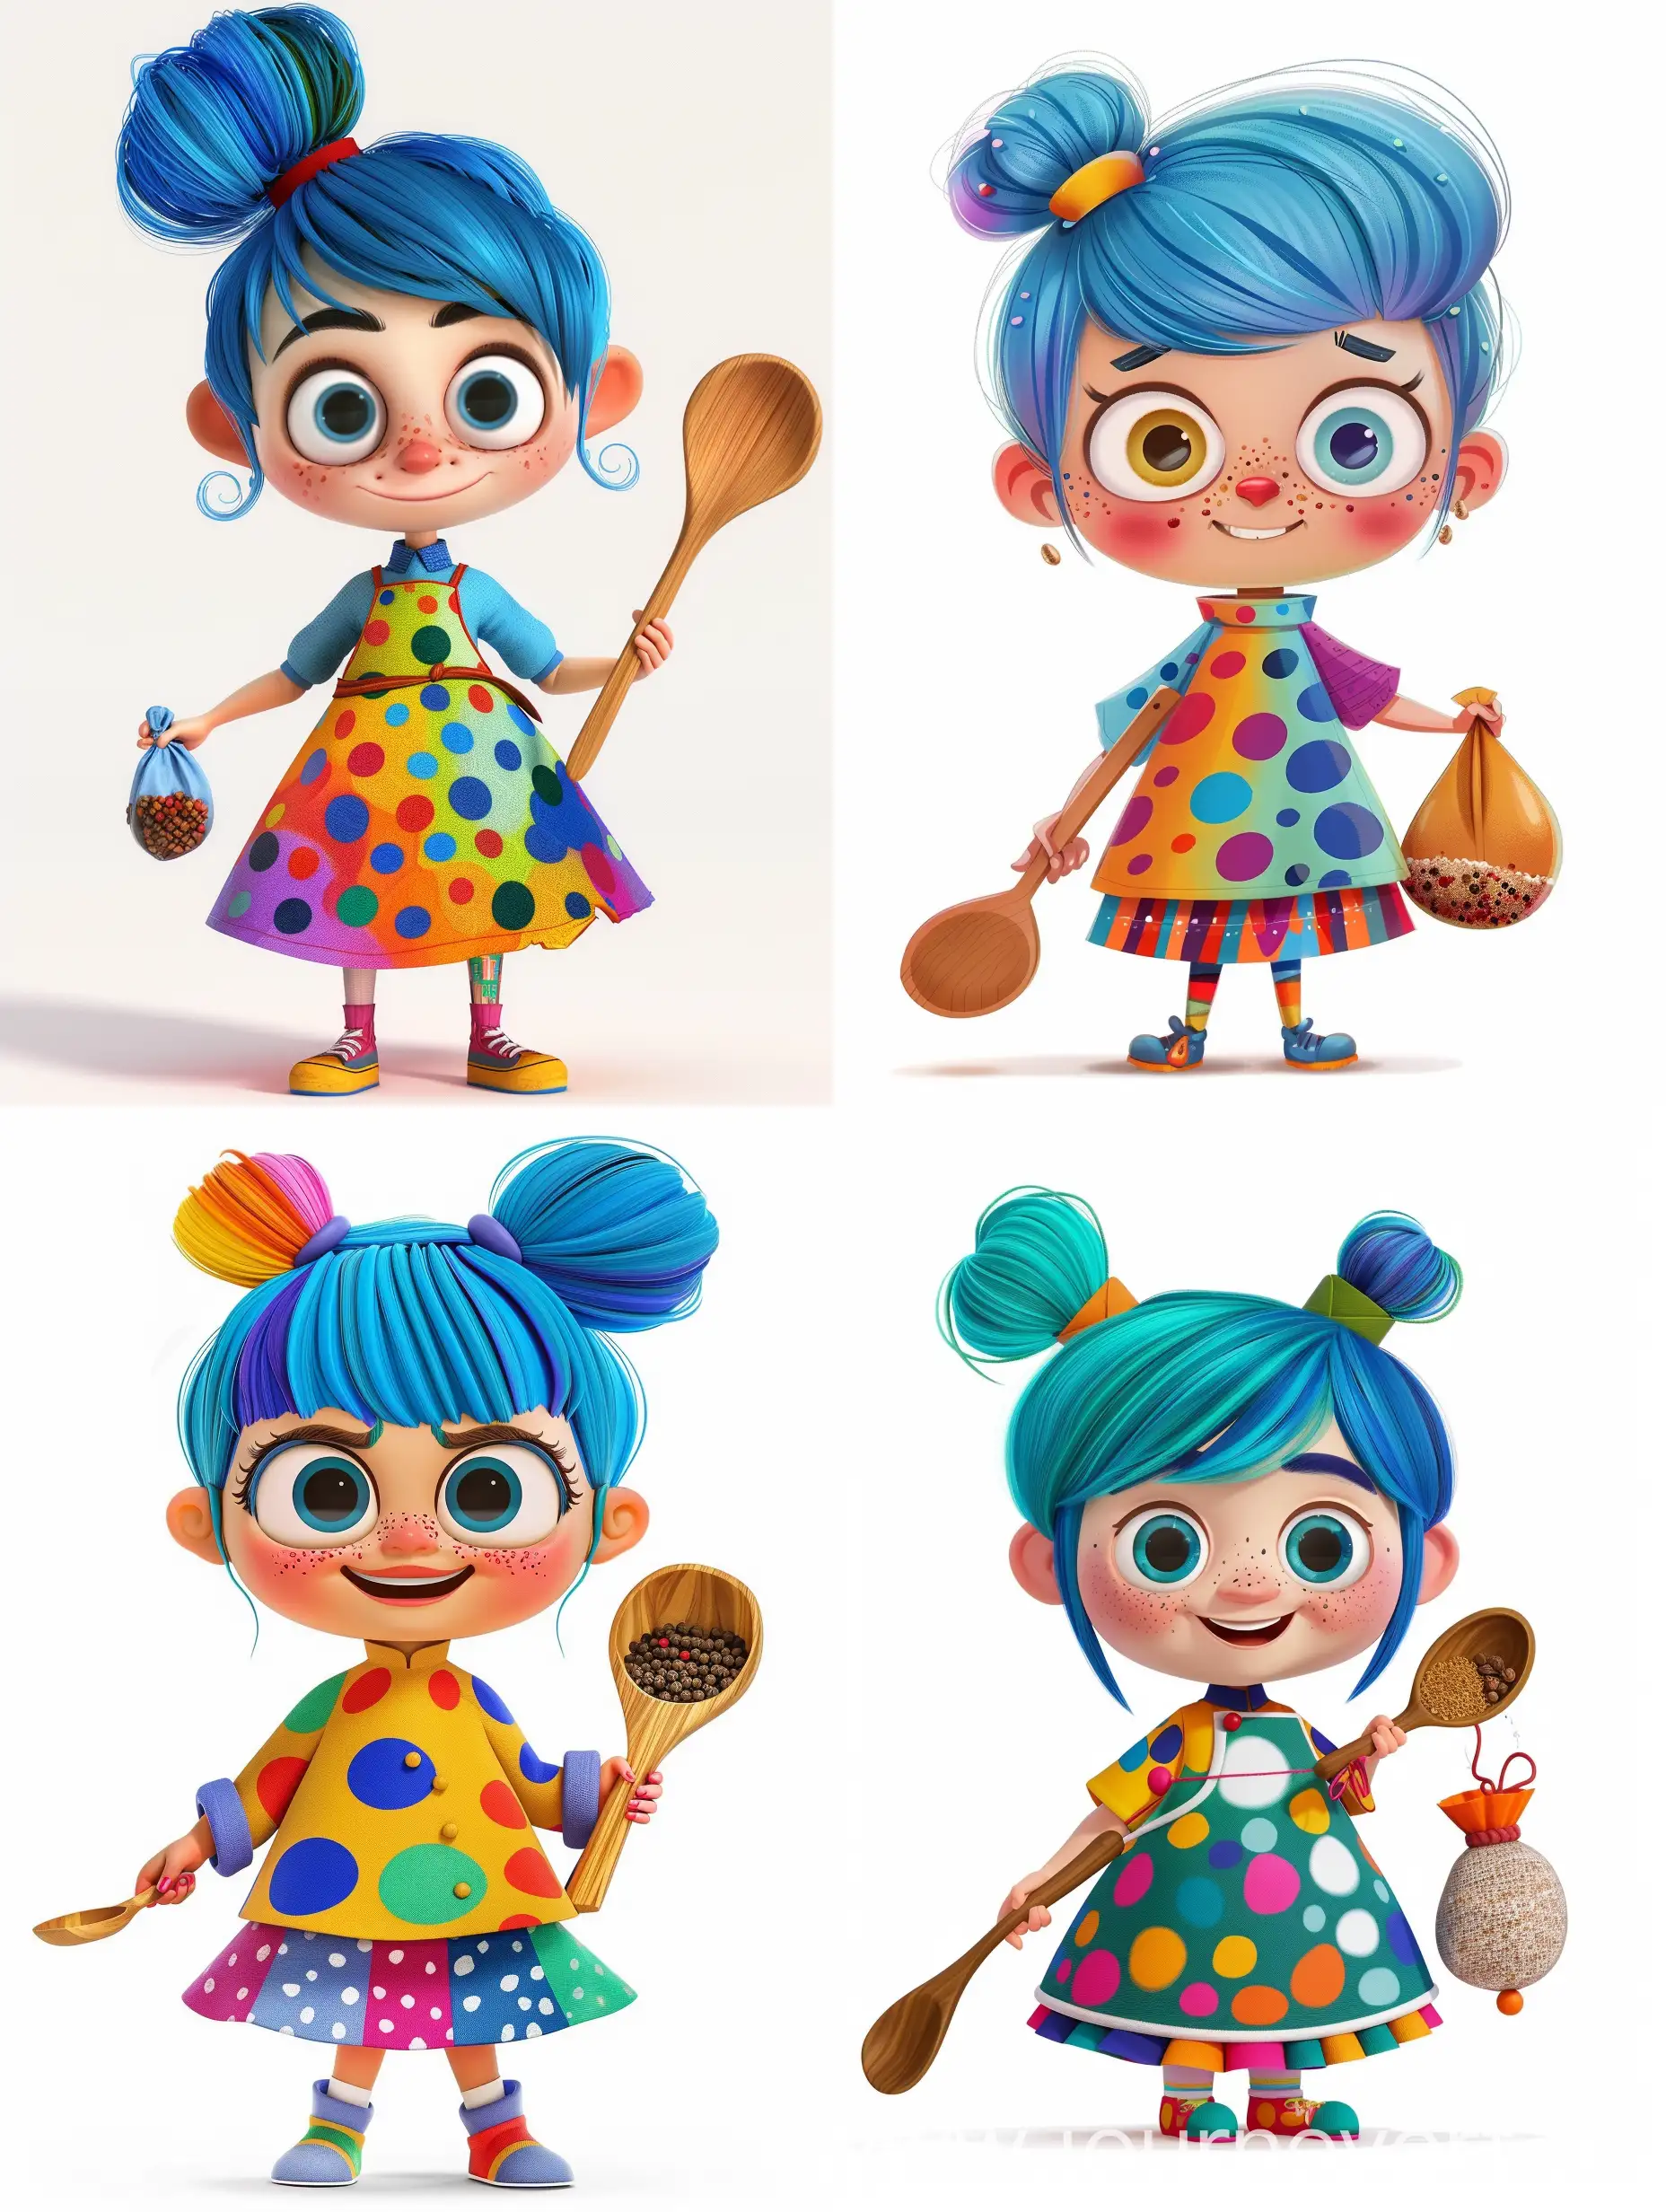 A 2D cartoon character named Chef Patty is an energetic cook with bright blue hair, always tied in a bun. Wearing a colorful chef's smock with lots of colorful spots. Her big, sparkling eyes are full of enthusiasm.

Chef Patty always has a wooden spoon cooking in her hand, ready for action at a moment's notice. She always has a wide smile on her face and her cheeks are slightly flushed from the heat of the kitchen. It has a characteristic pepper and salt bag from which it can always conjure magical spices.

Her dressing style is a mix of colorful aprons and skirts, always suited to a given day and mood. Chef Patty is not only a culinary master, but also able to make everyone laugh with her positive approach to life. Her slogan is: "Life is like soup - the more love you add, the better the dish becomes!"